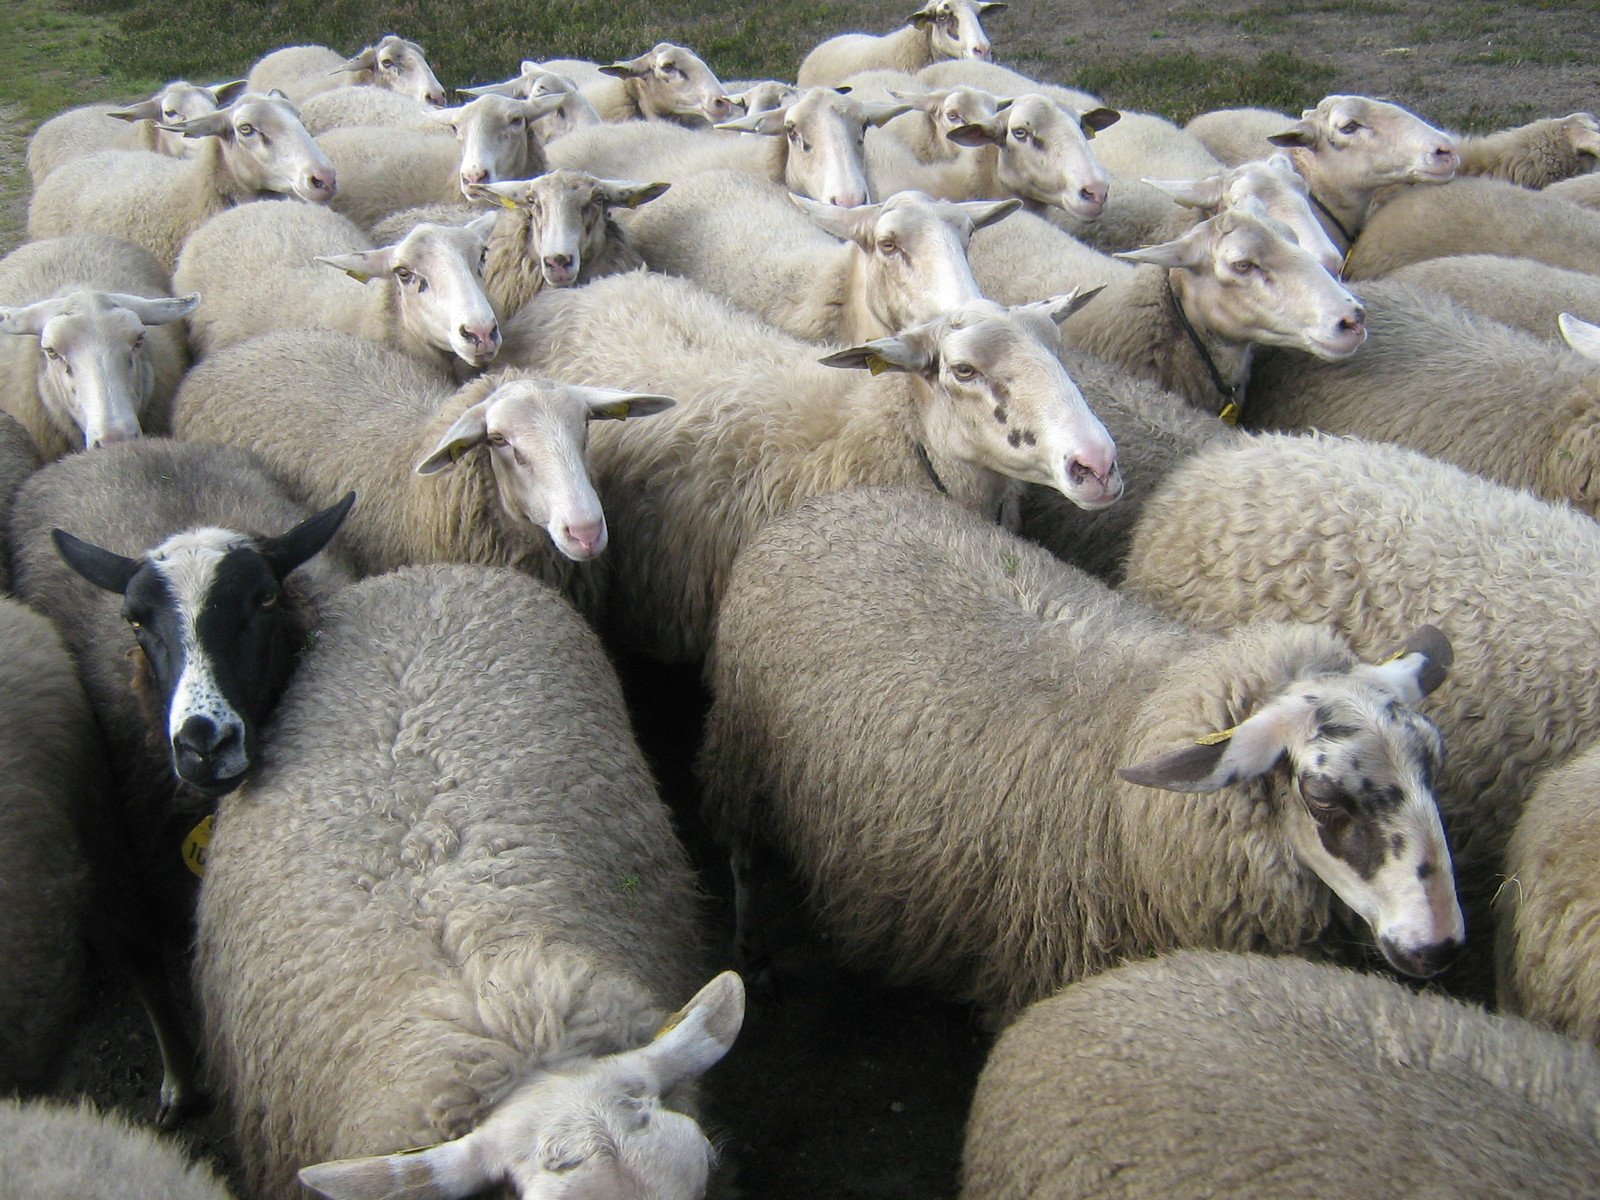 a herd of sheep with their heads turned to the side